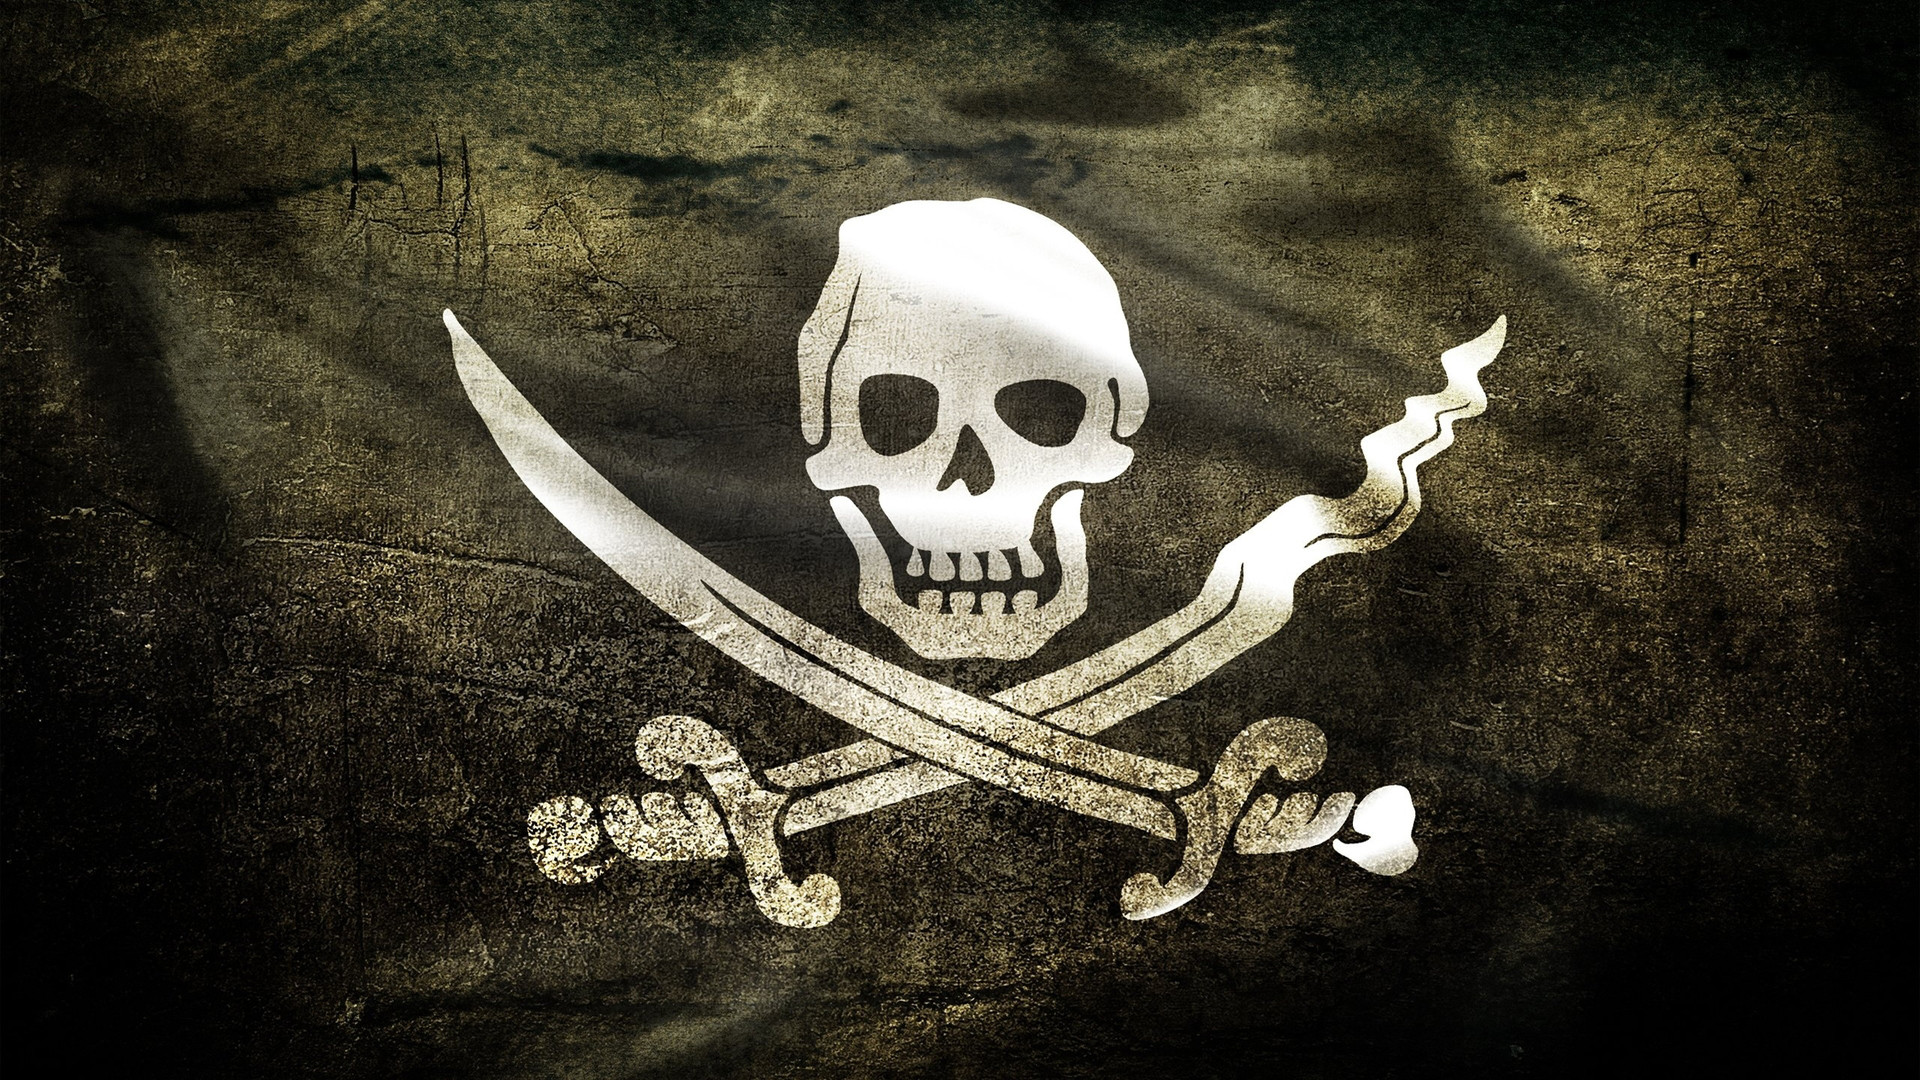 1920x1080 Skull Flag wallpaper from Skulls wallpapers Pirate Flag Wallpaper  Miscellaneous Otherotherwallpapers Free .